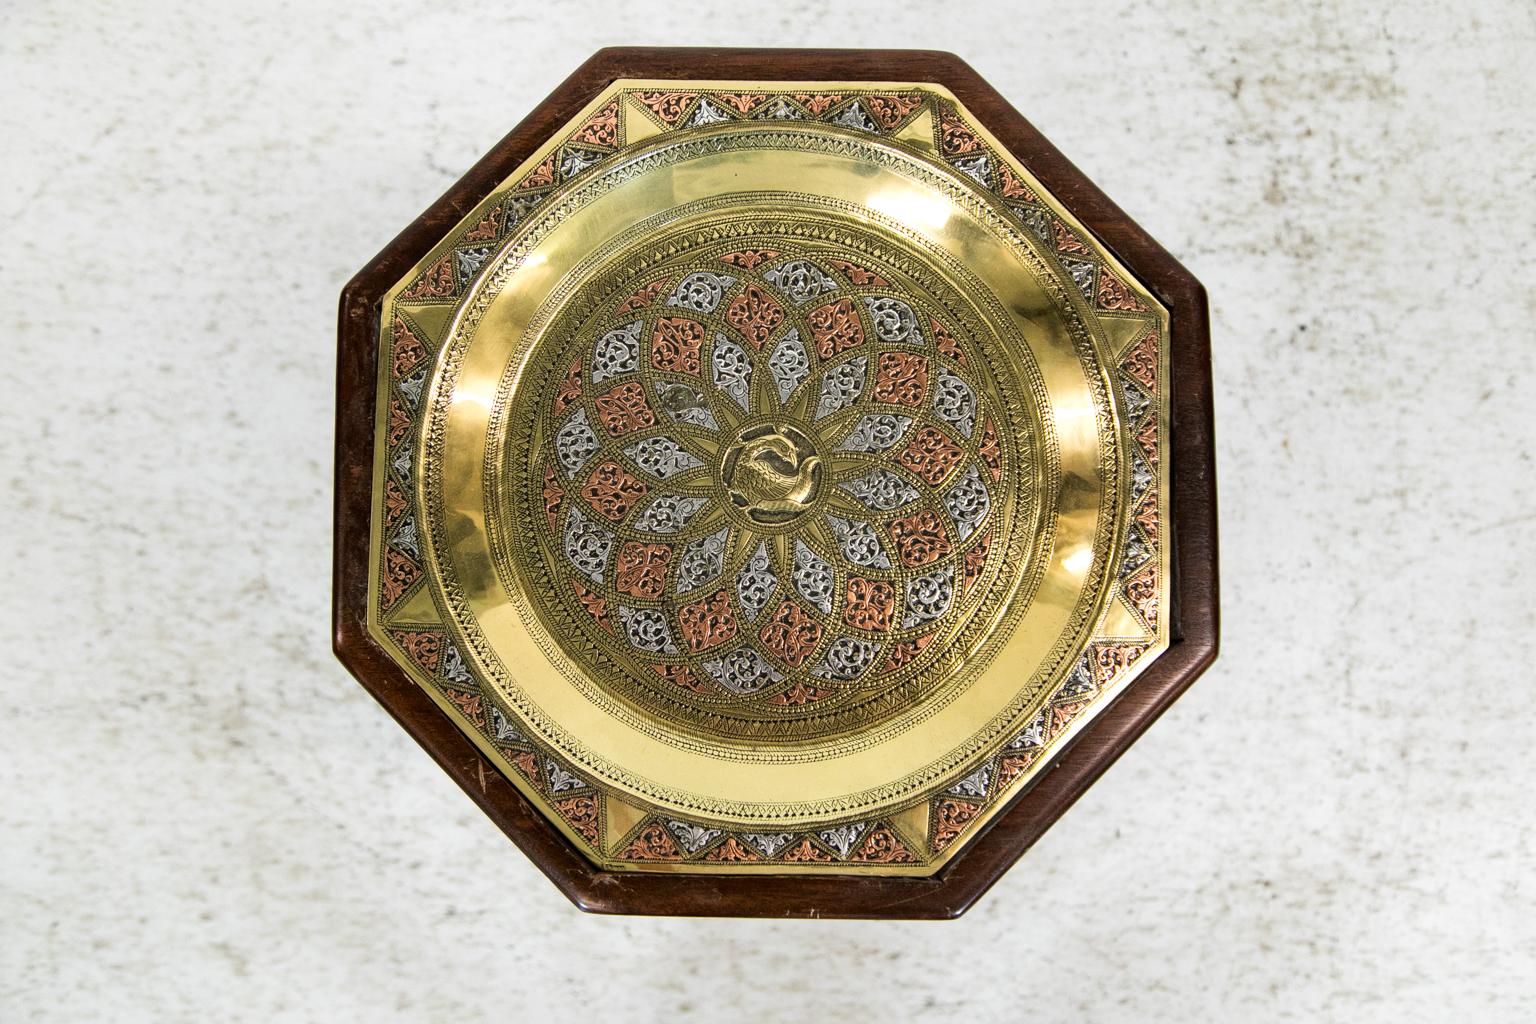 This engraved brass tray table has an engraved octagonal brass tray that is overlaid with raised copper and silvery metal panels that are engraved and chased with arabesques. The center of the tray has a raised stylized engraved bird. The solid